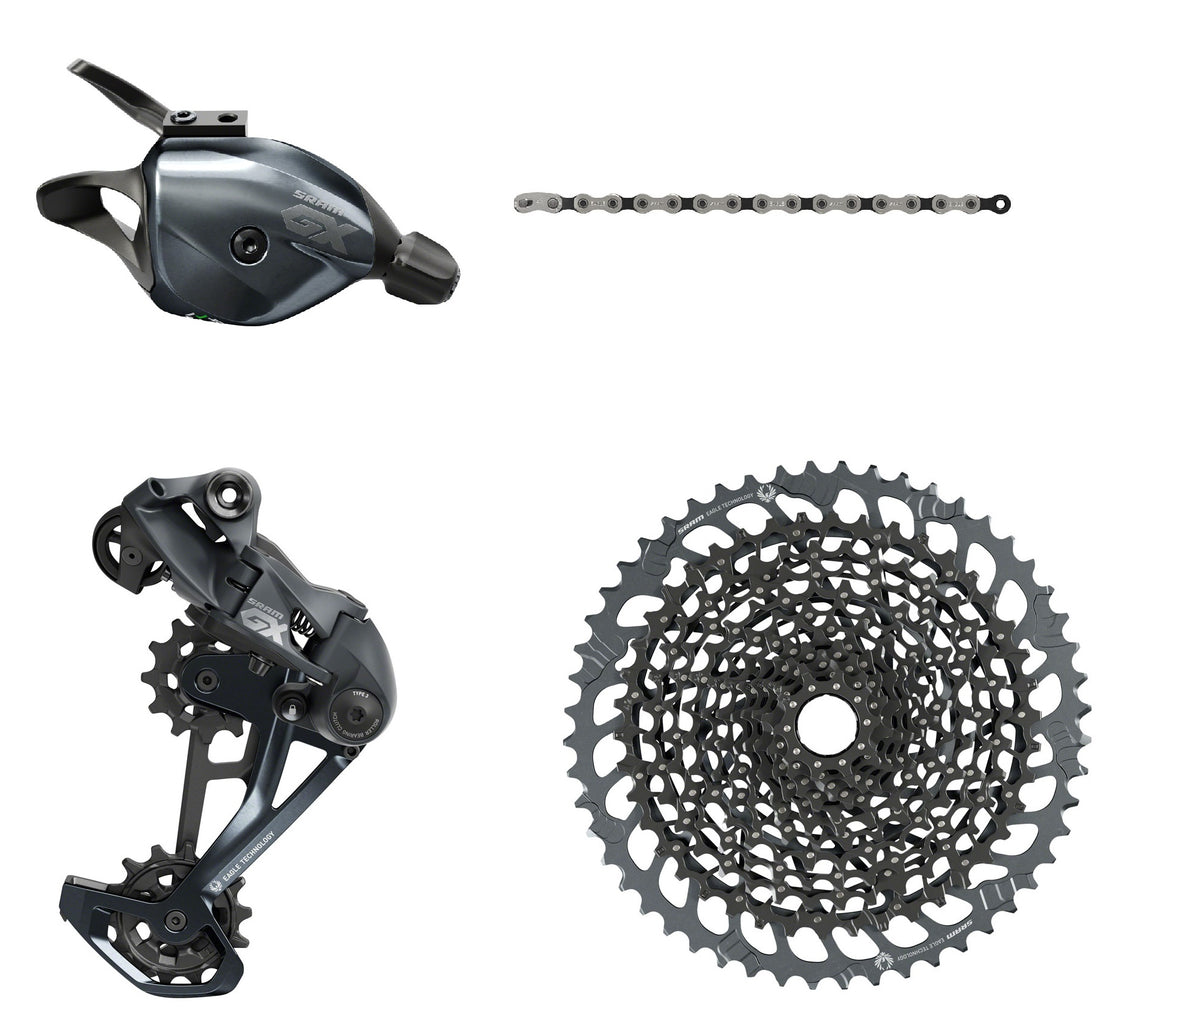 SRAM GX Eagle 12-Speed Groupset with 10-52t Cassette, Shifter, Derailleur and Chain MPN: BU-FW6143-CH1073-RD6149-LD2545 Kit-In-A-Box Mtn Group GX Eagle Groupset